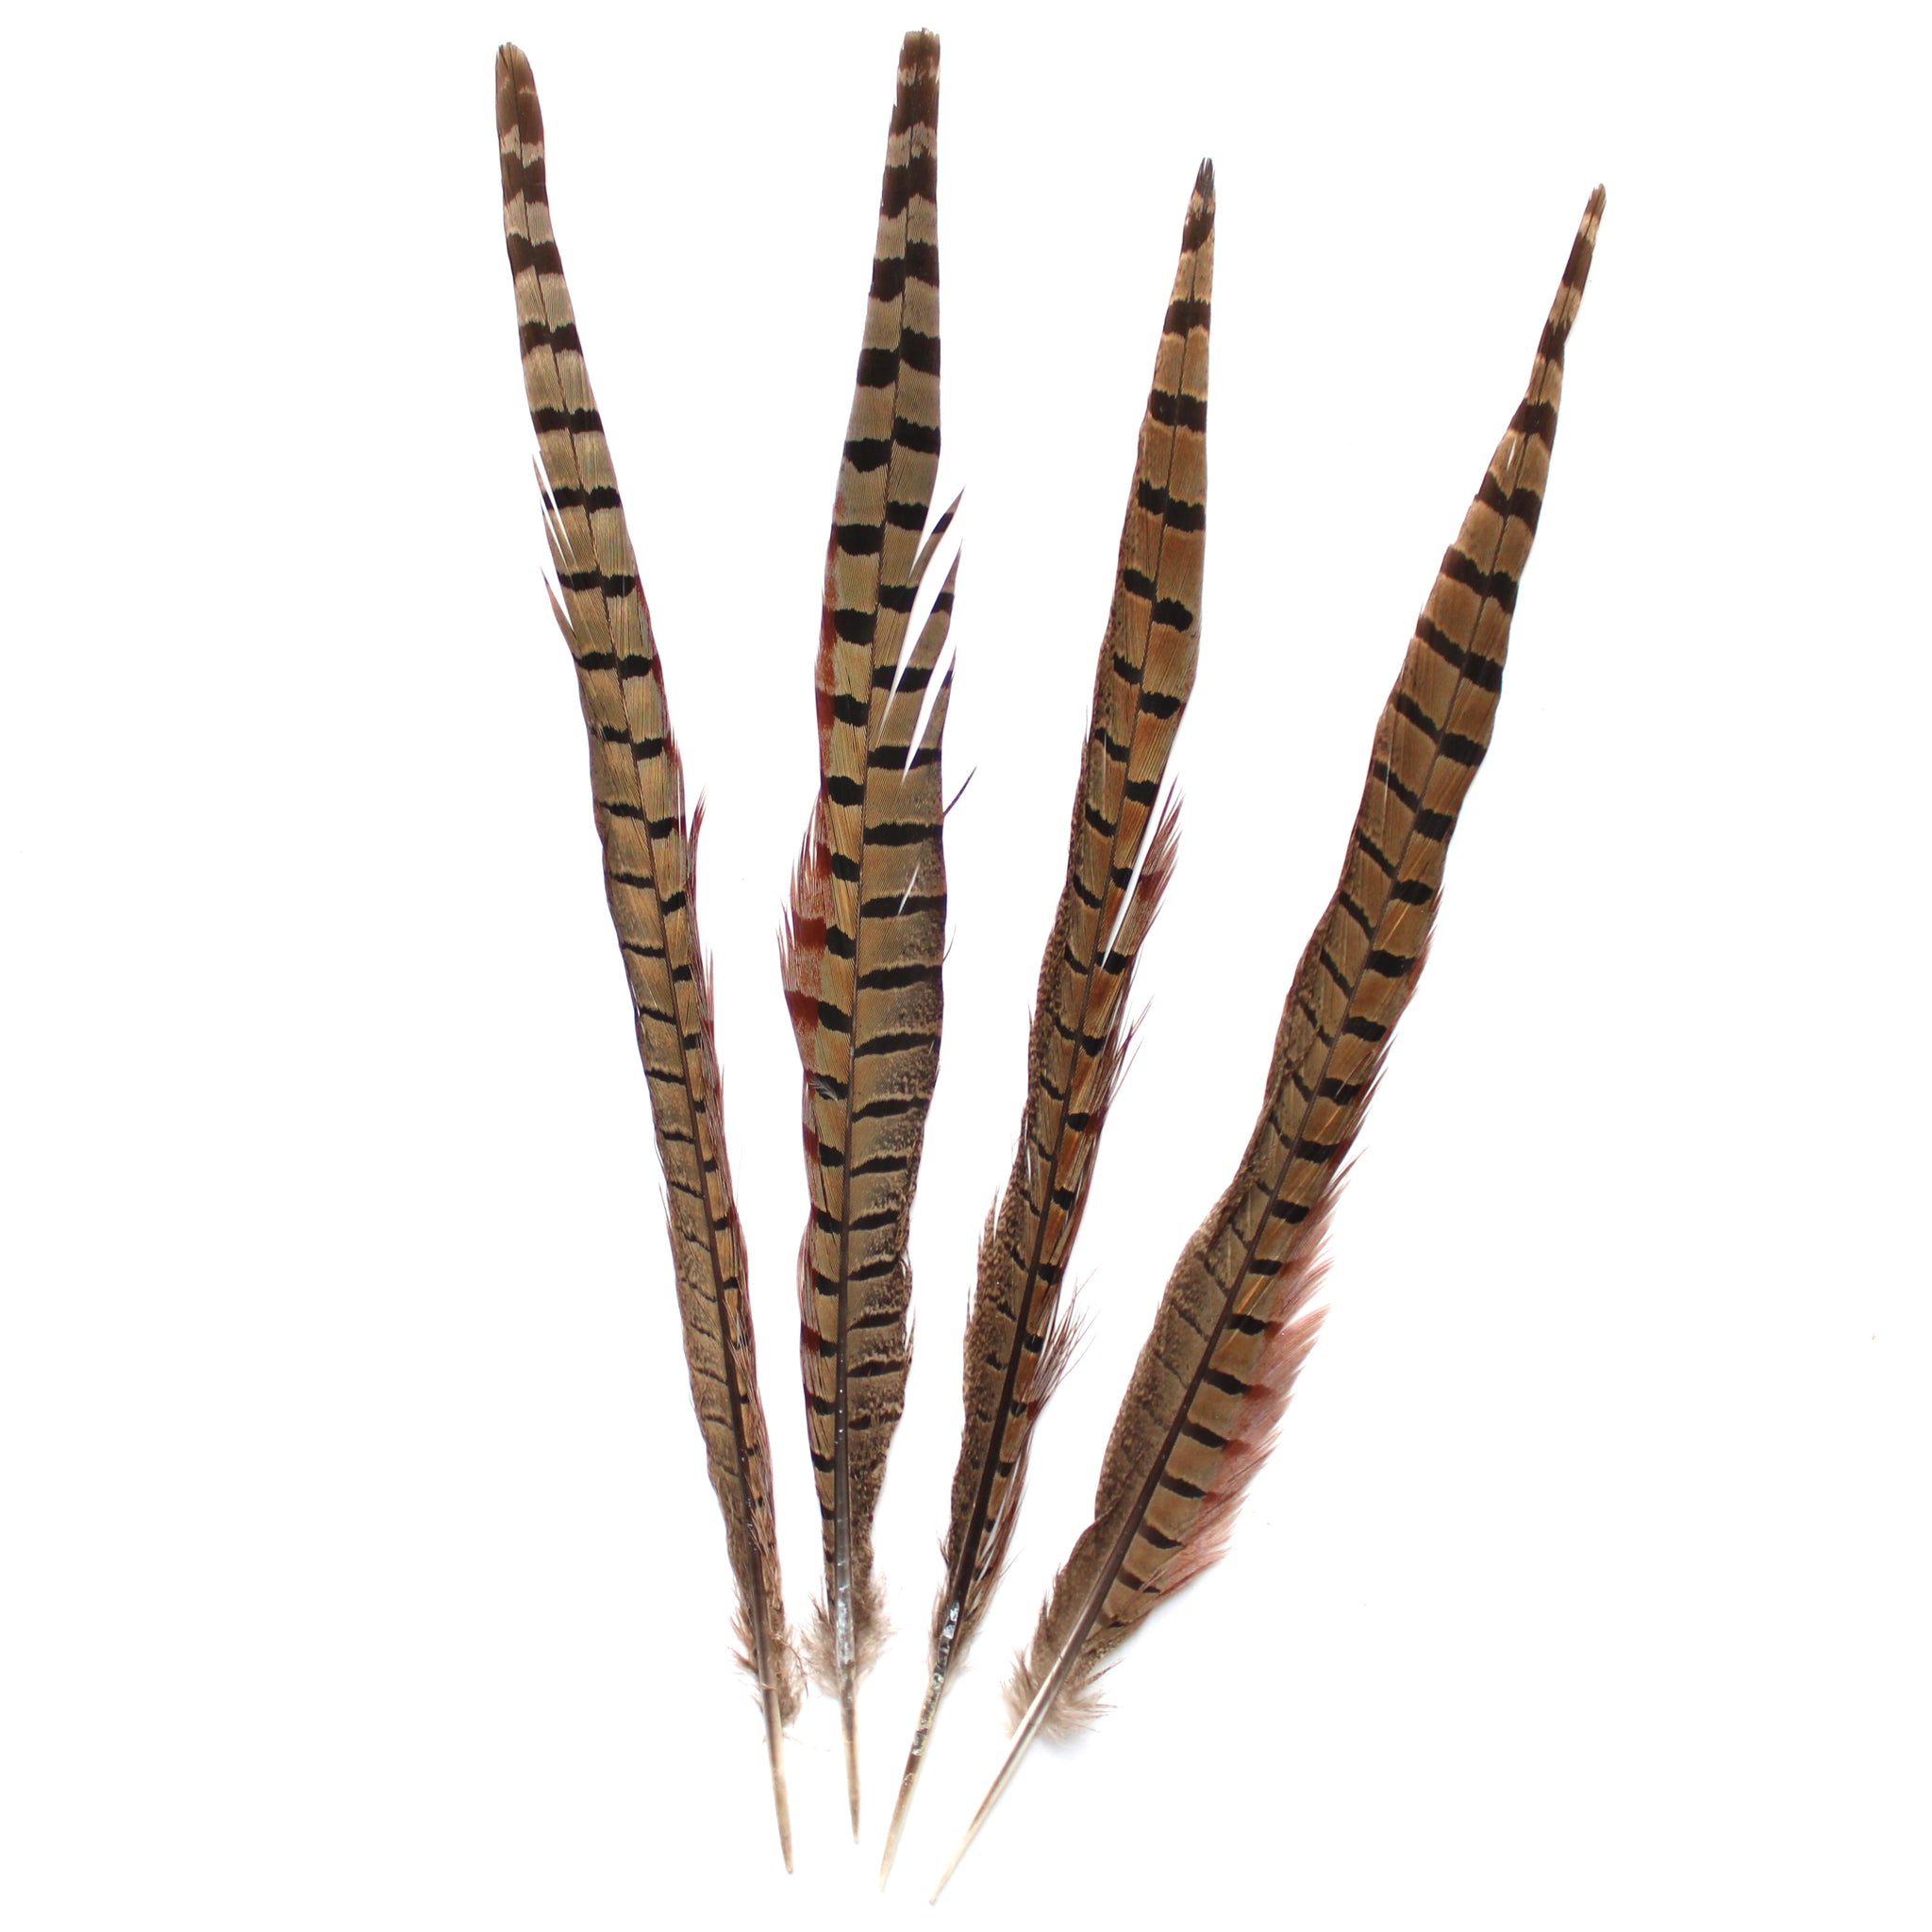 RING NECK PHEASANT FEATHERS 10 PK 20-22inch